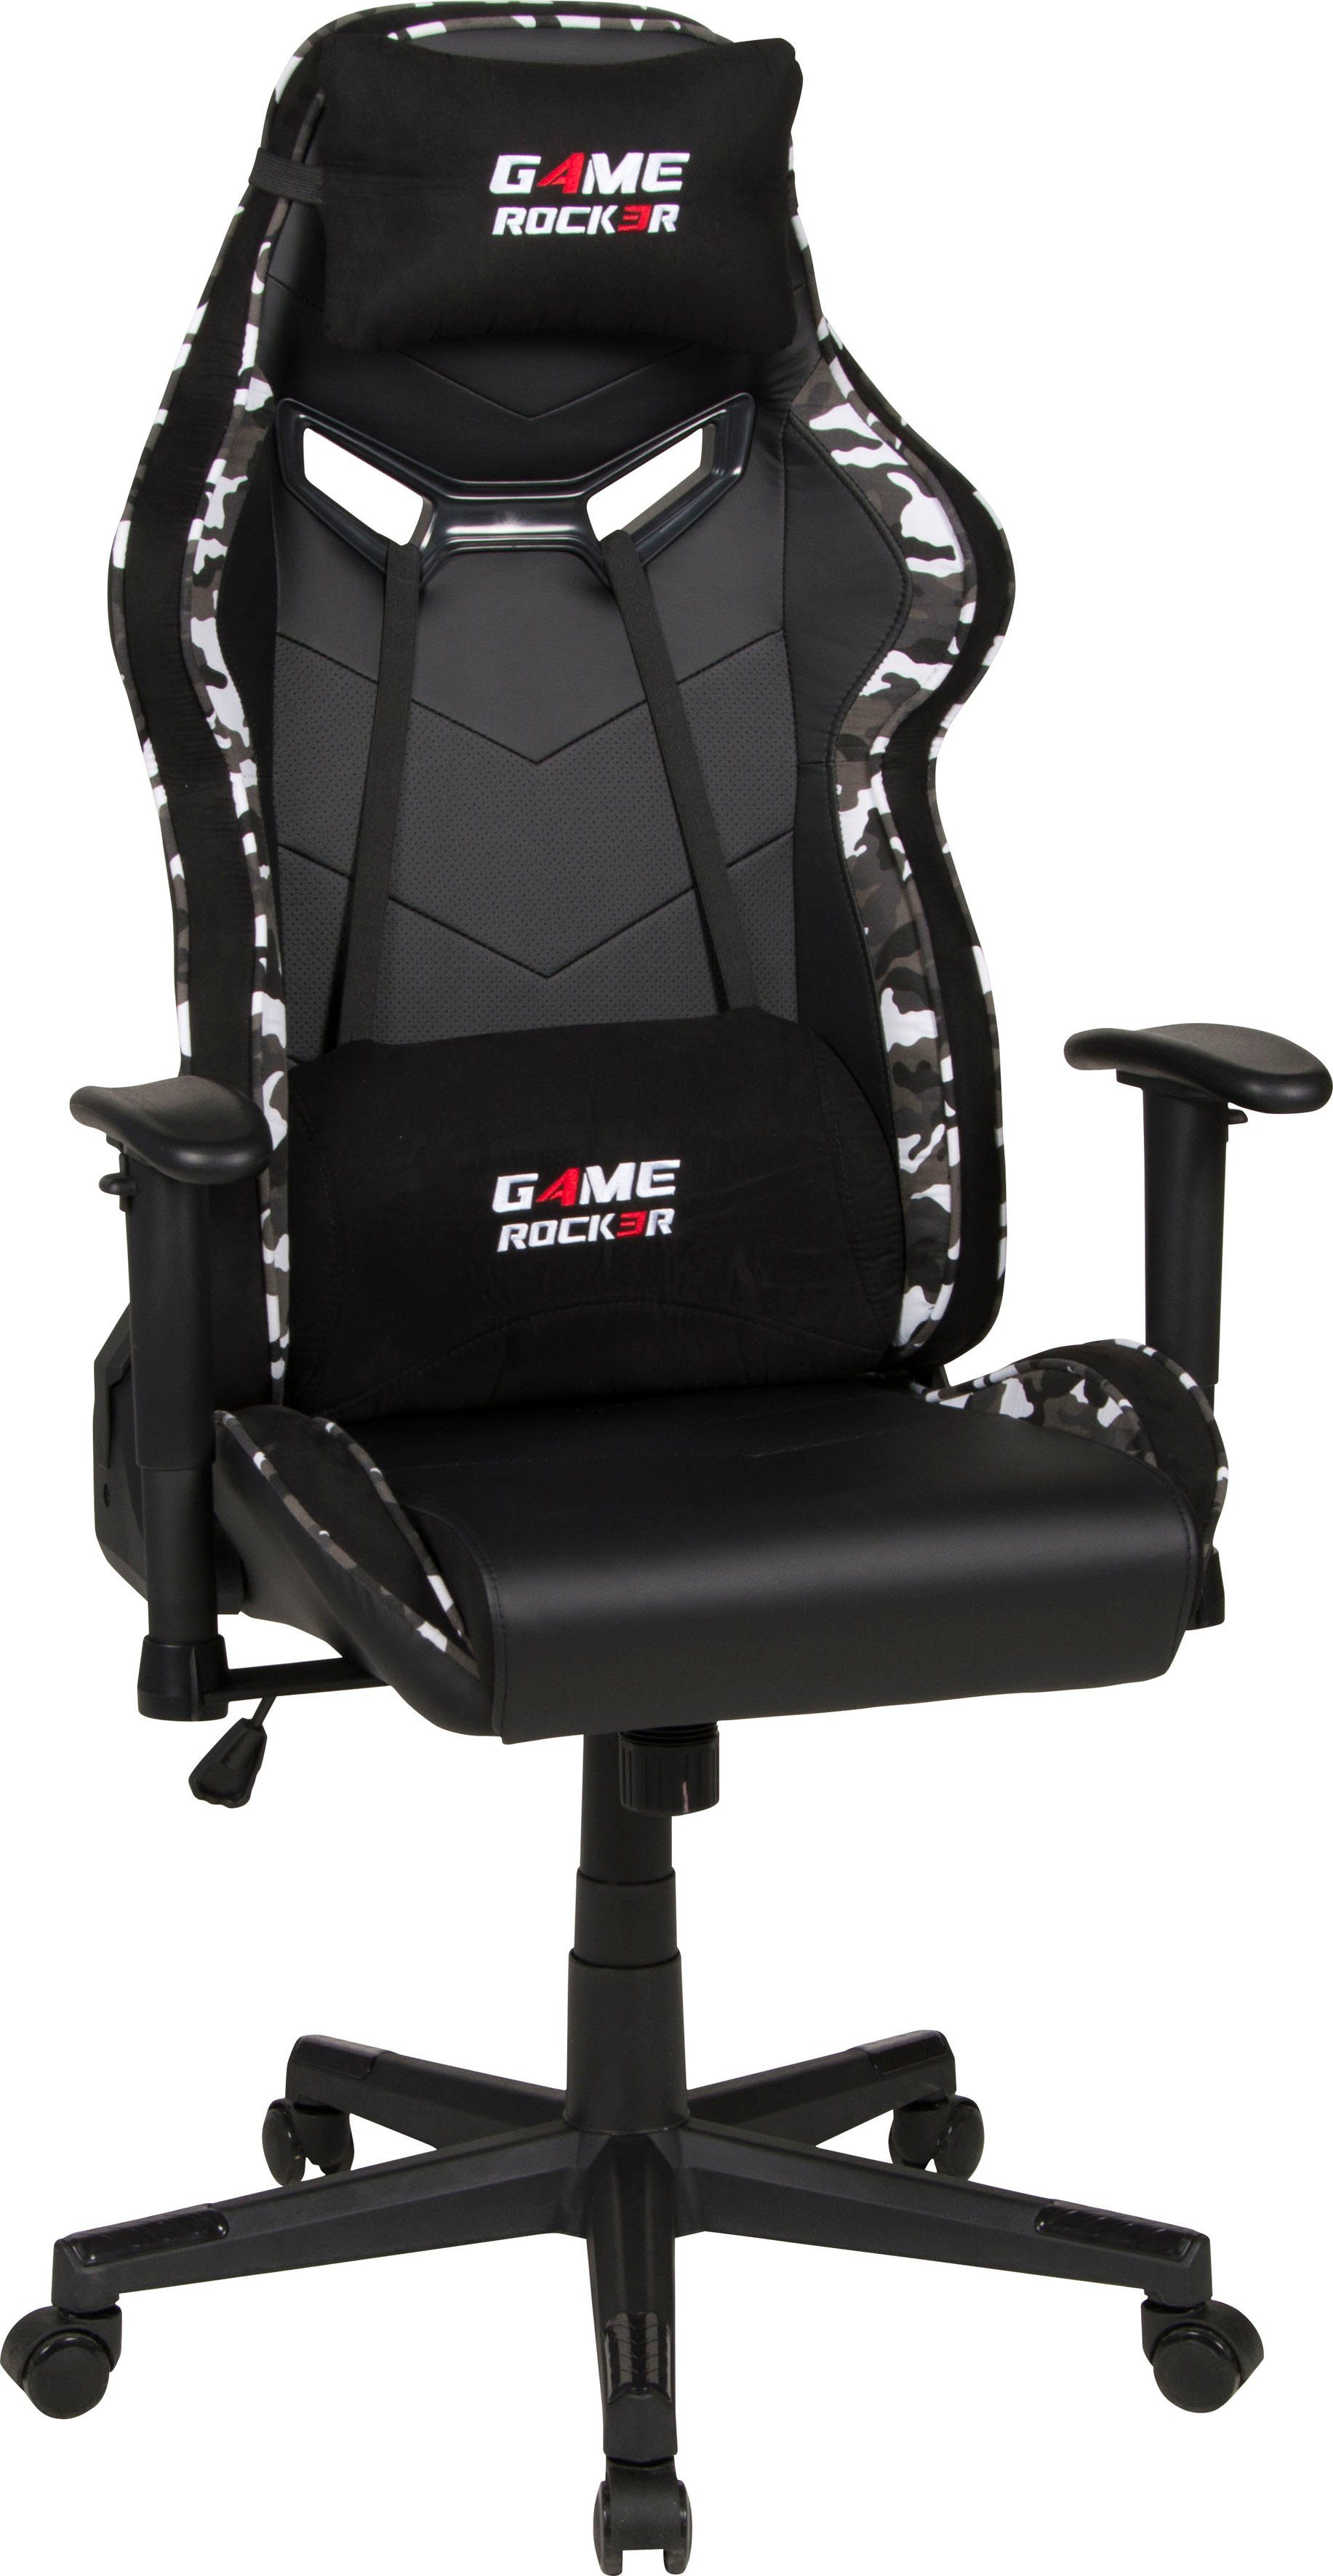 Duo Collection Chefsessel Game-Rocker G-30, Gaming Chair in Camouflage Optik schwarz/camouflage grau